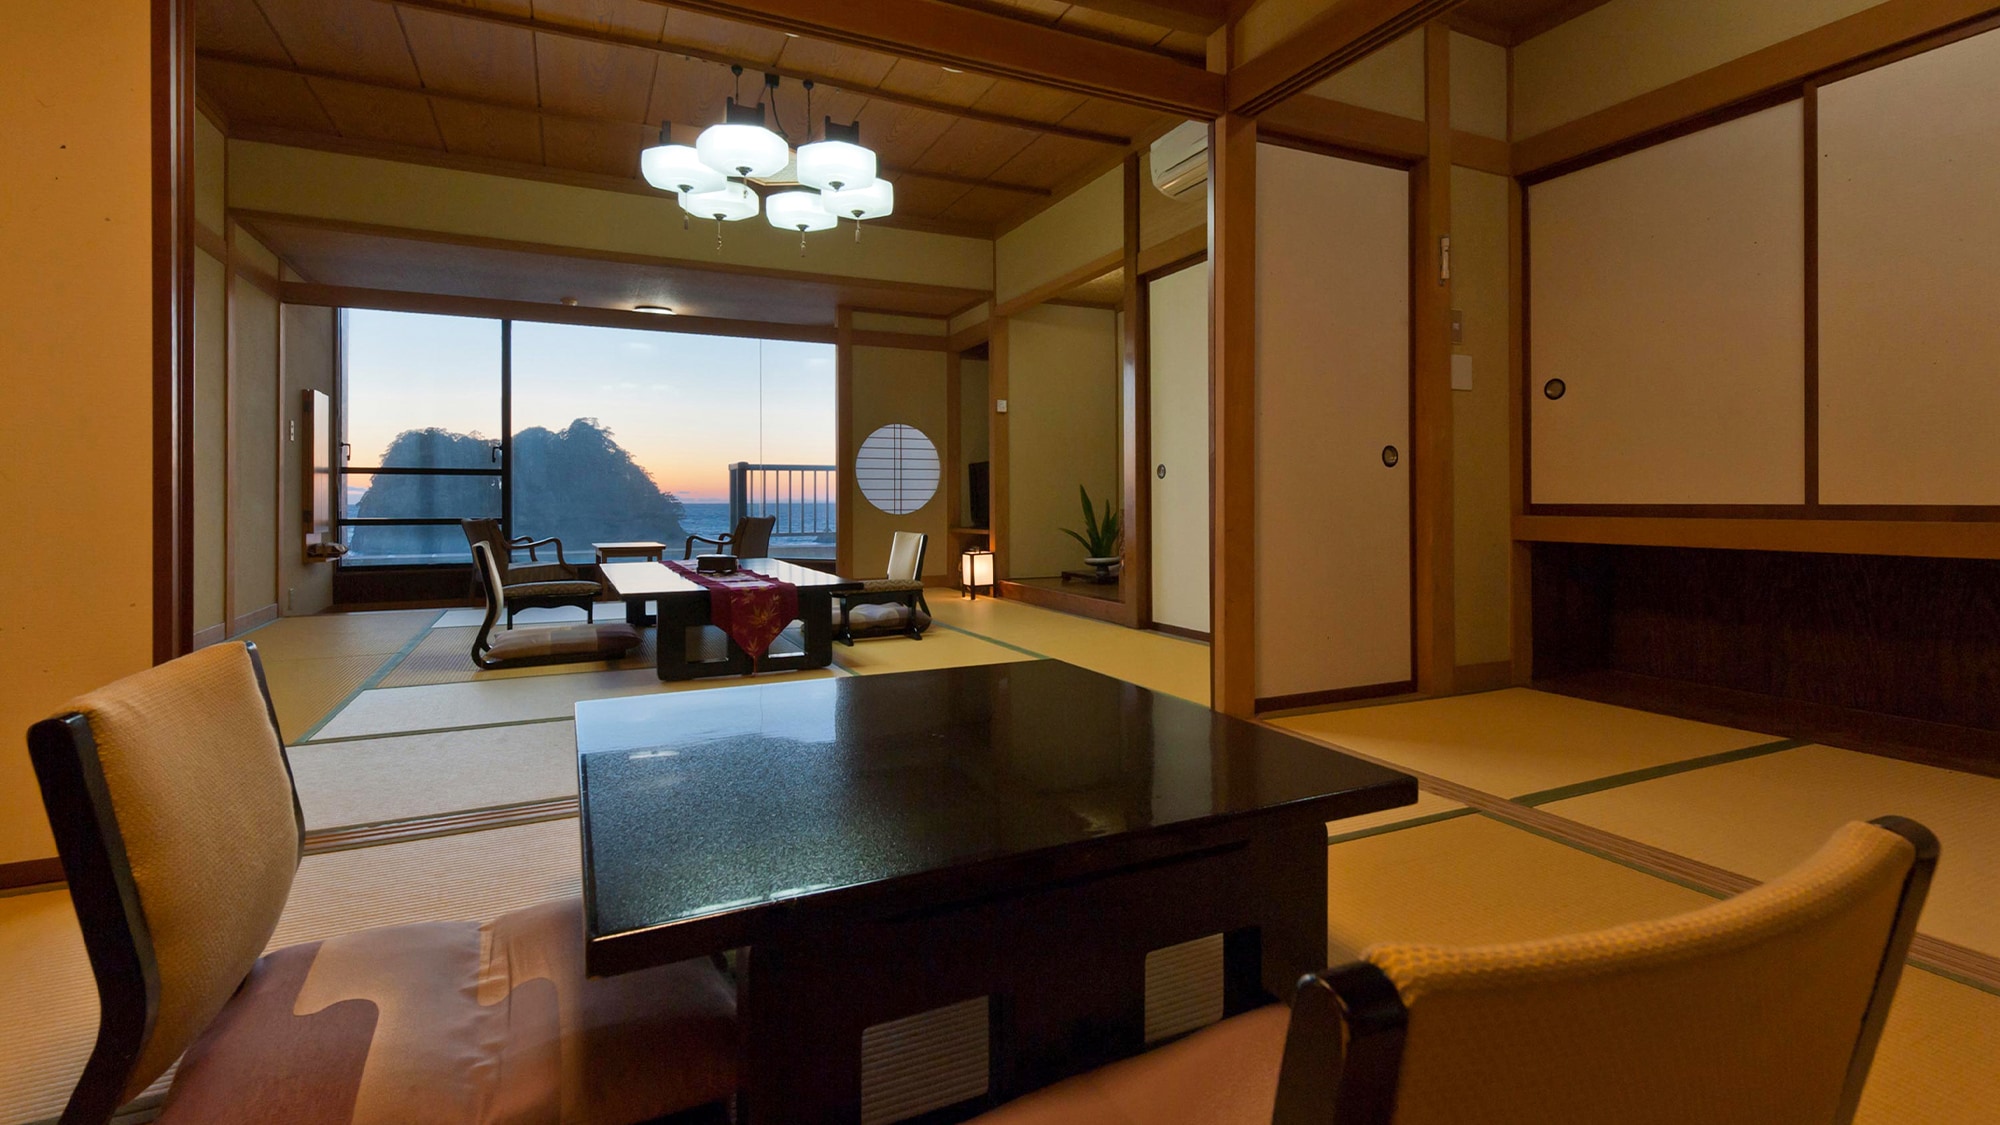 ■Junior Suite Japanese-style room | From the spacious semi-special Japanese-style room, you can enjoy a spectacular view of Dogashima.